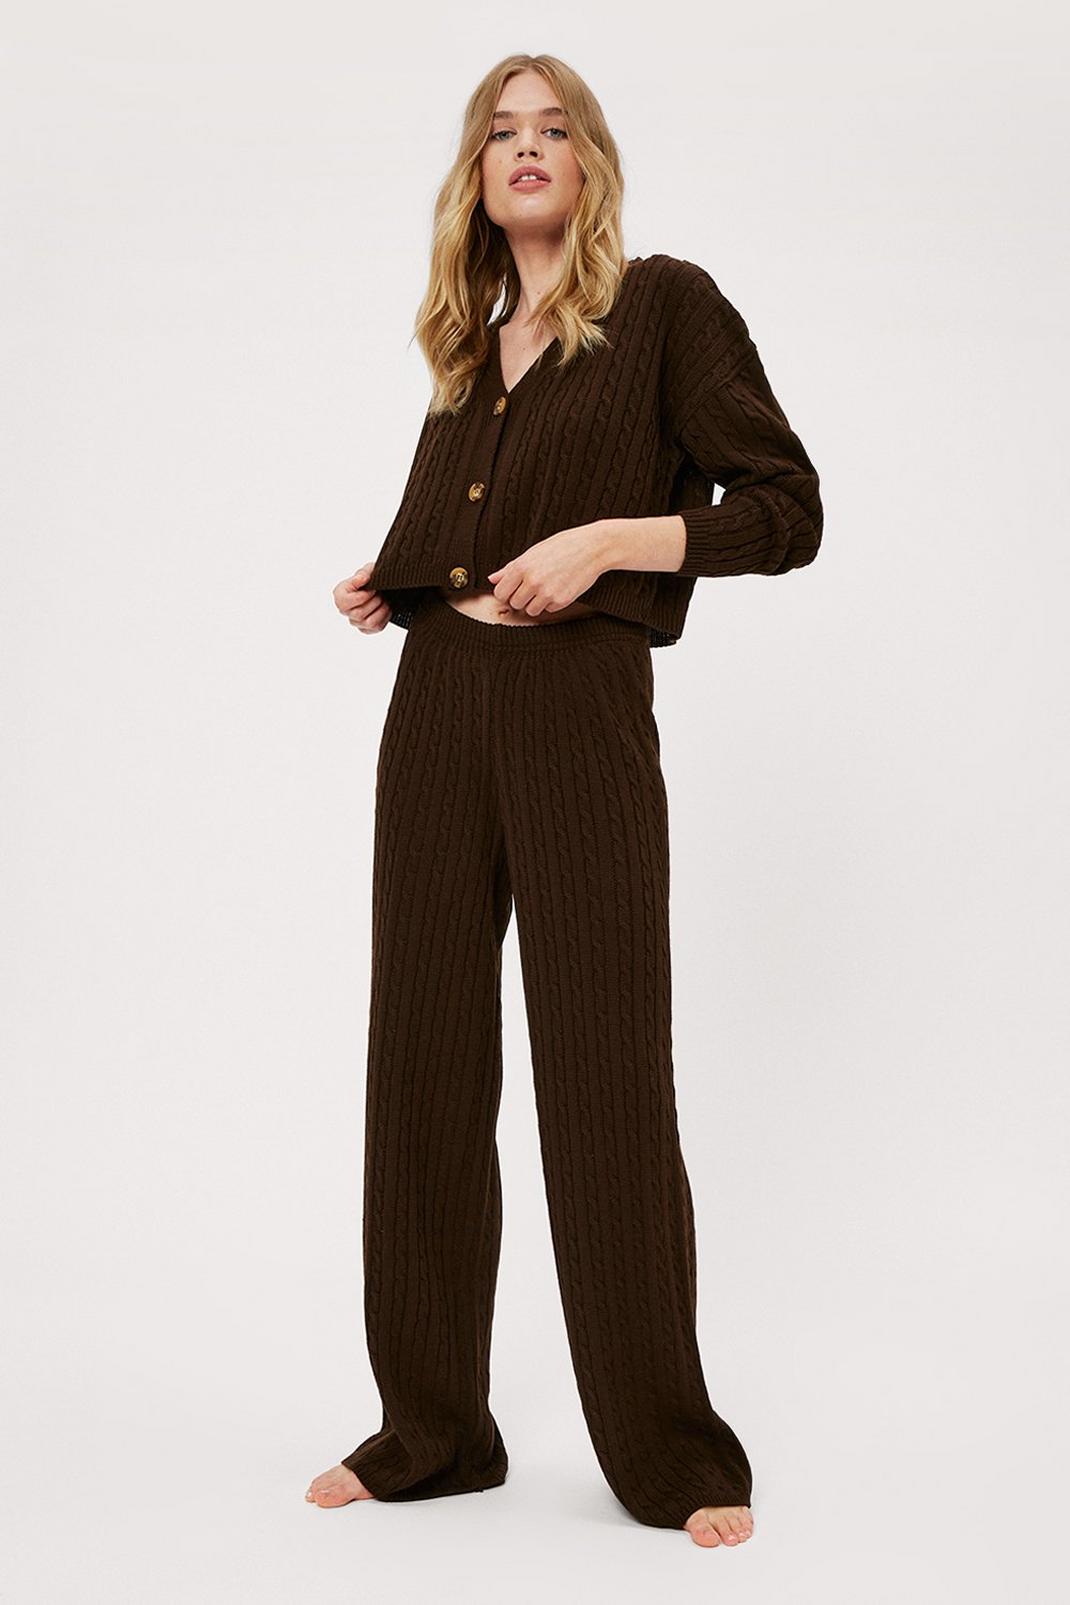 Chocolate Cable Knit Wide Leg Pants Loungewear Set image number 1